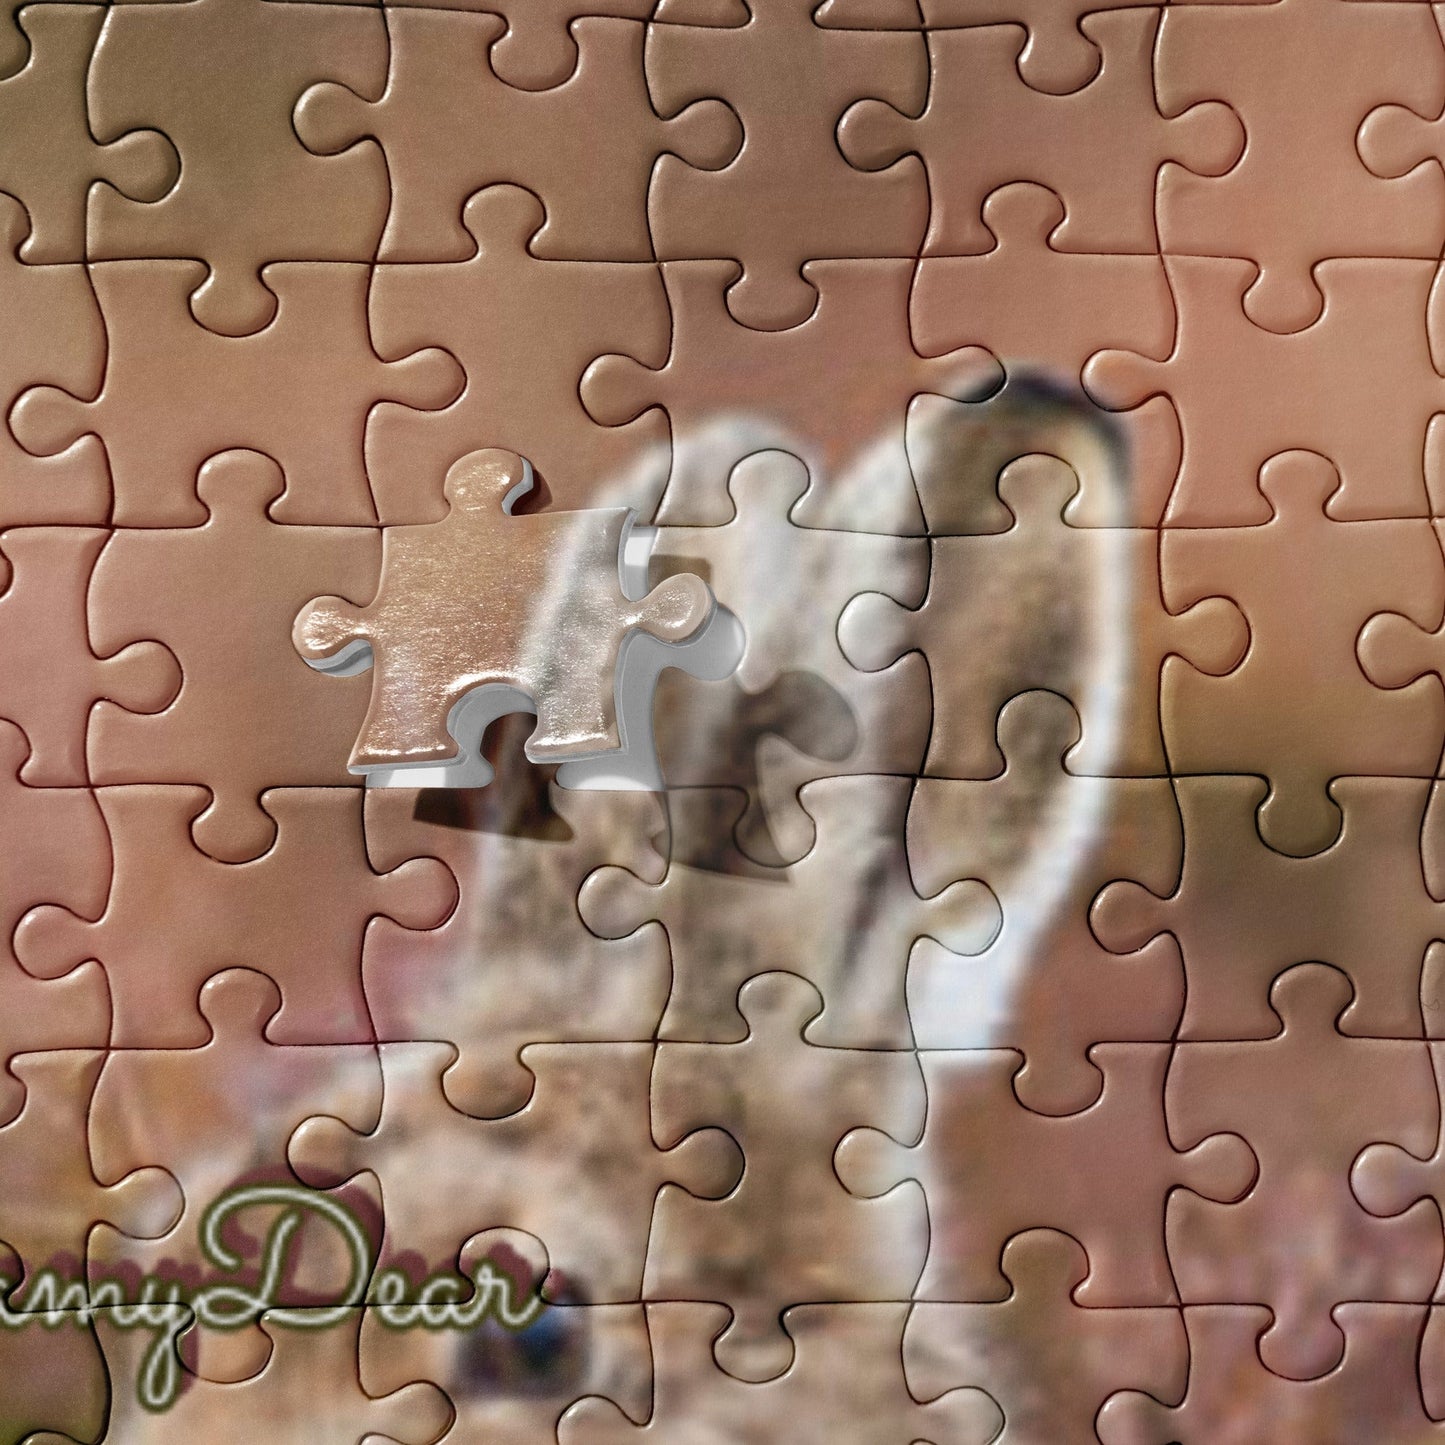 "Camouflage" puzzle